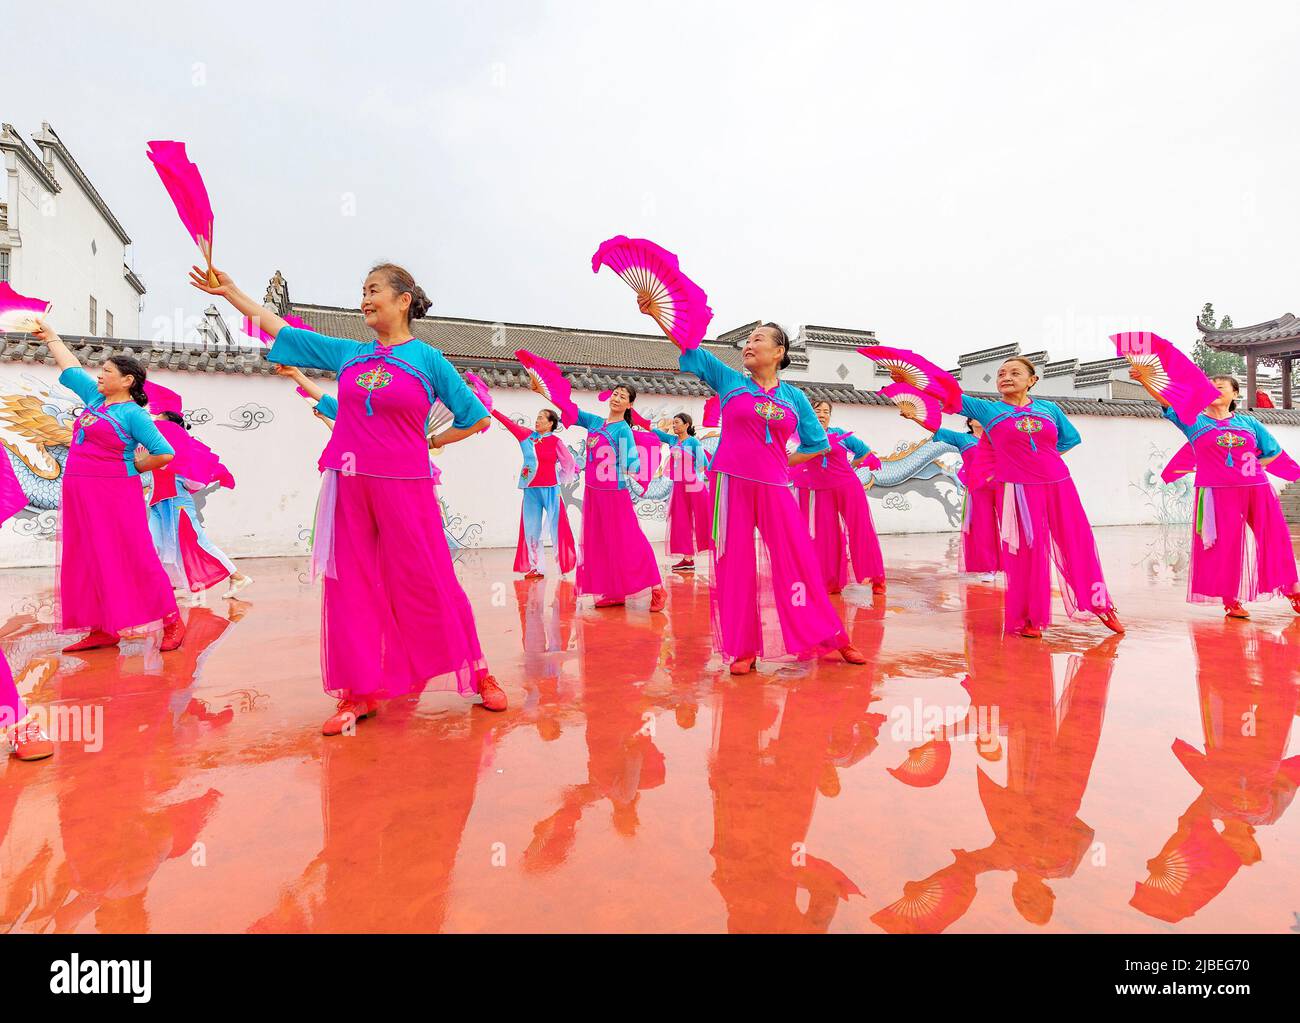 SUQIAN, CHINA - JUNE 5, 2022 - More than 30 bodybuilders sing and dance at the Lakeside Shuanglong Stage to celebrate World Environment Day in Suqian, Stock Photo